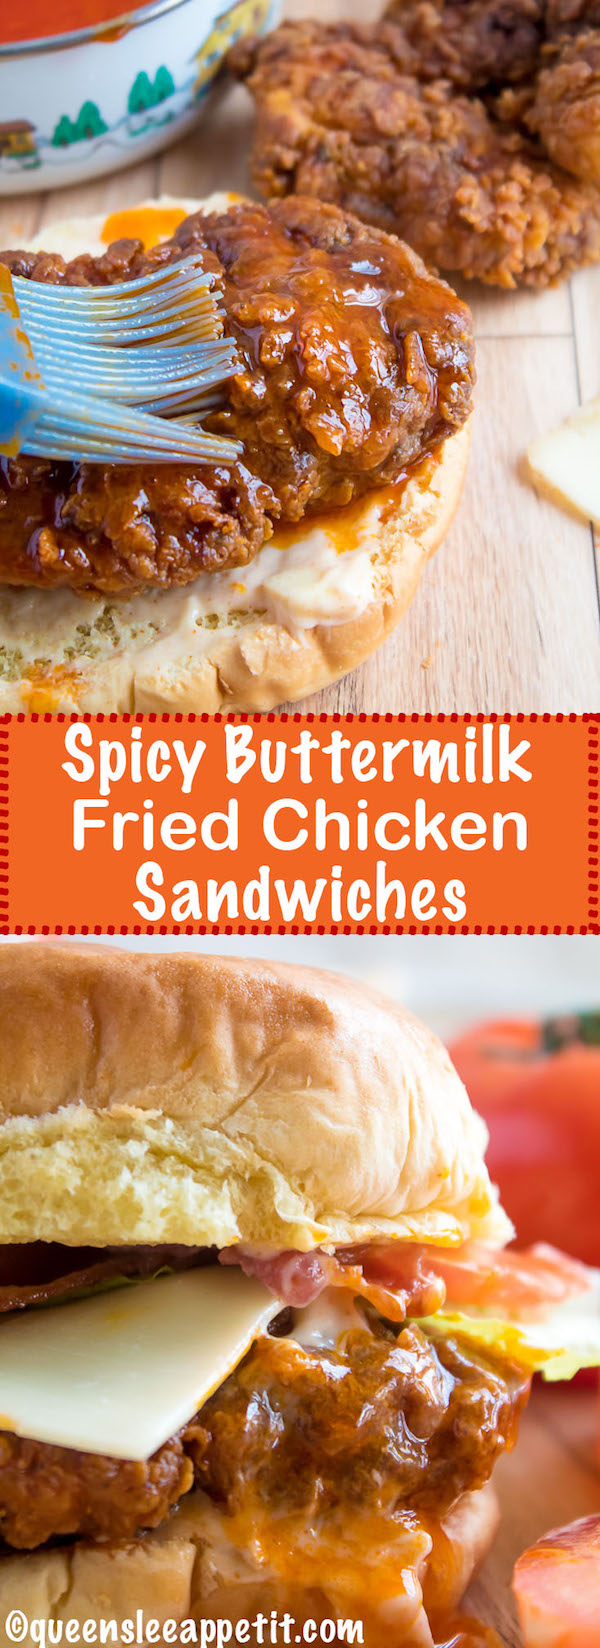 These Spicy Fried Chicken Sandwiches are crispy, juicy and seasoned to perfection. Sandwiched between toasted brioche buns, fresh lettuce, tomatoes, mozzarella, crispy bacon and a flavourful spicy aioli — these fried chicken sandwiches are comfort food at its best!